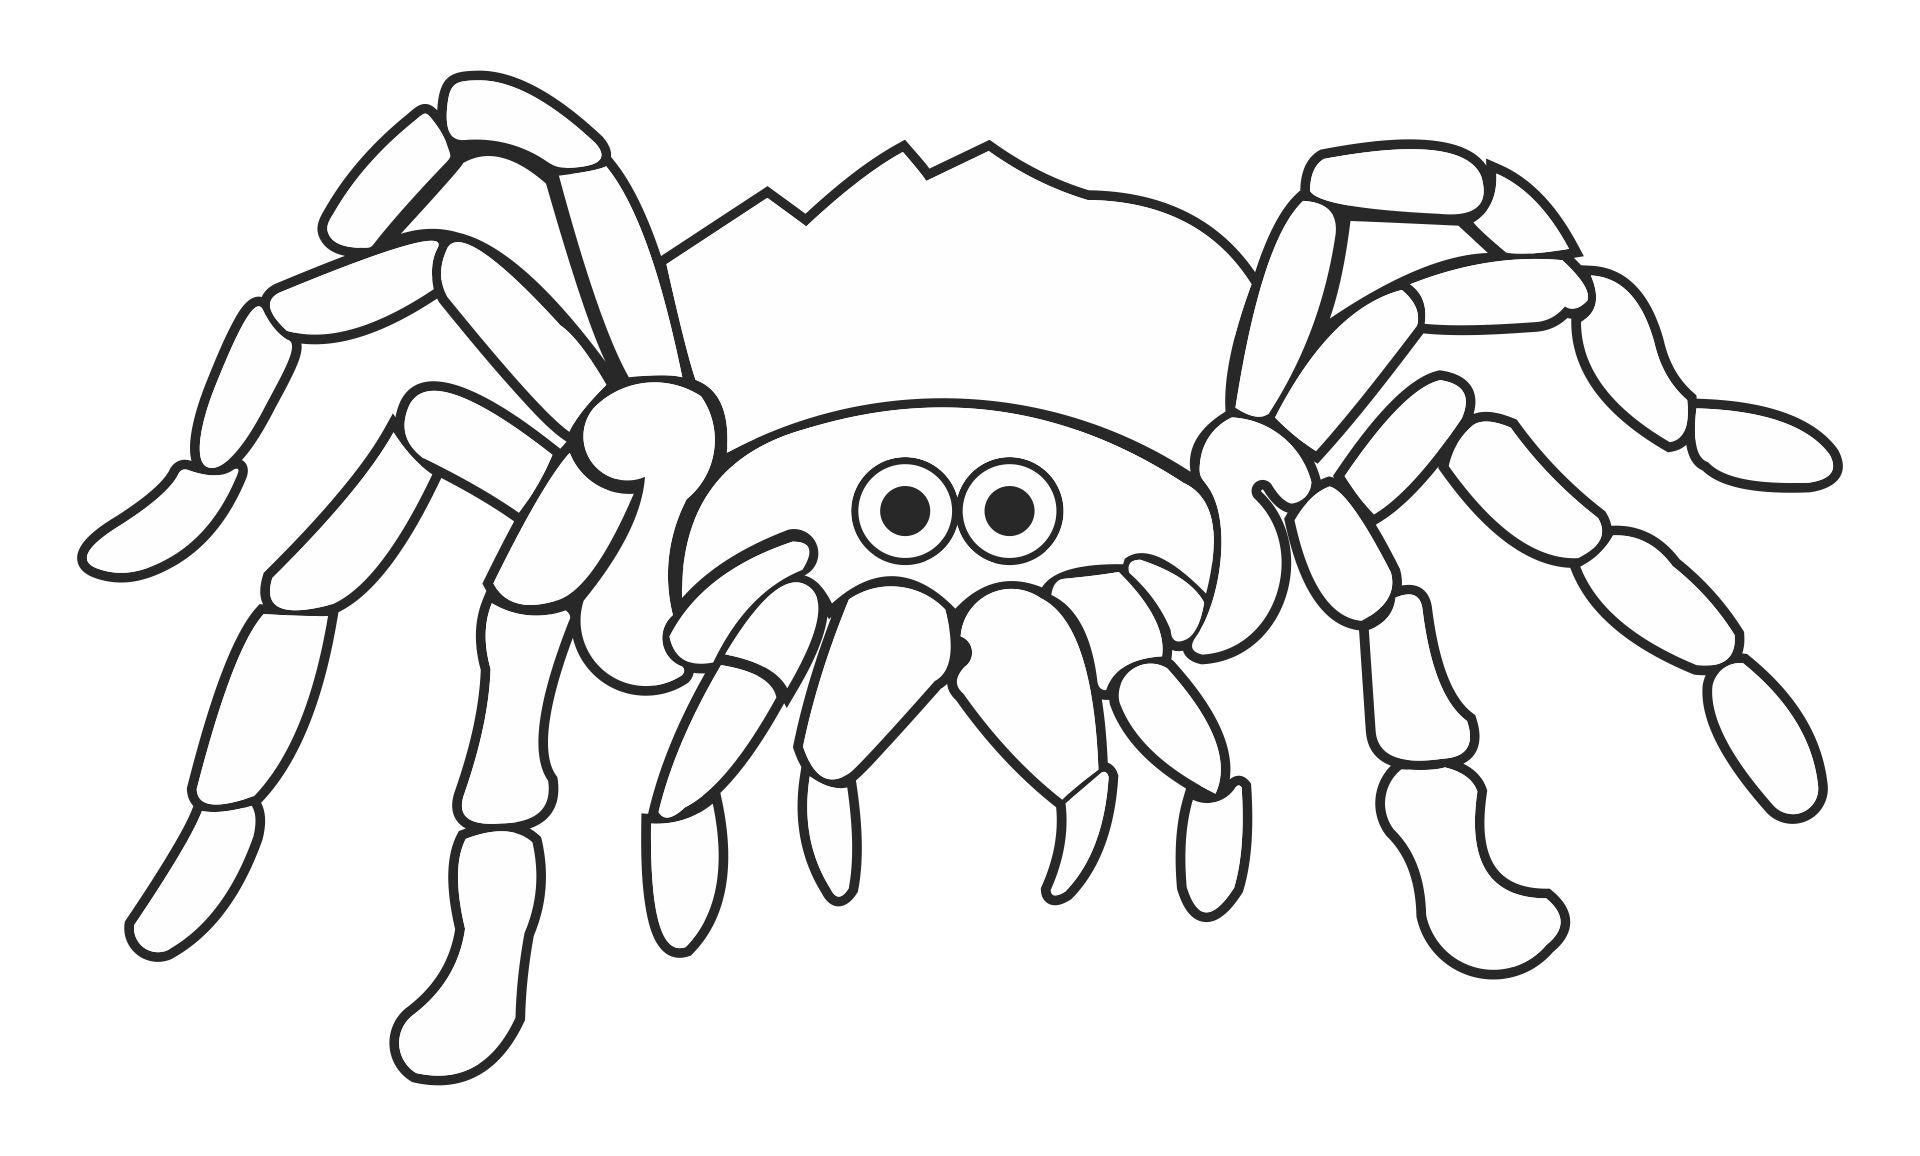 Spider Coloring Pages For Adults